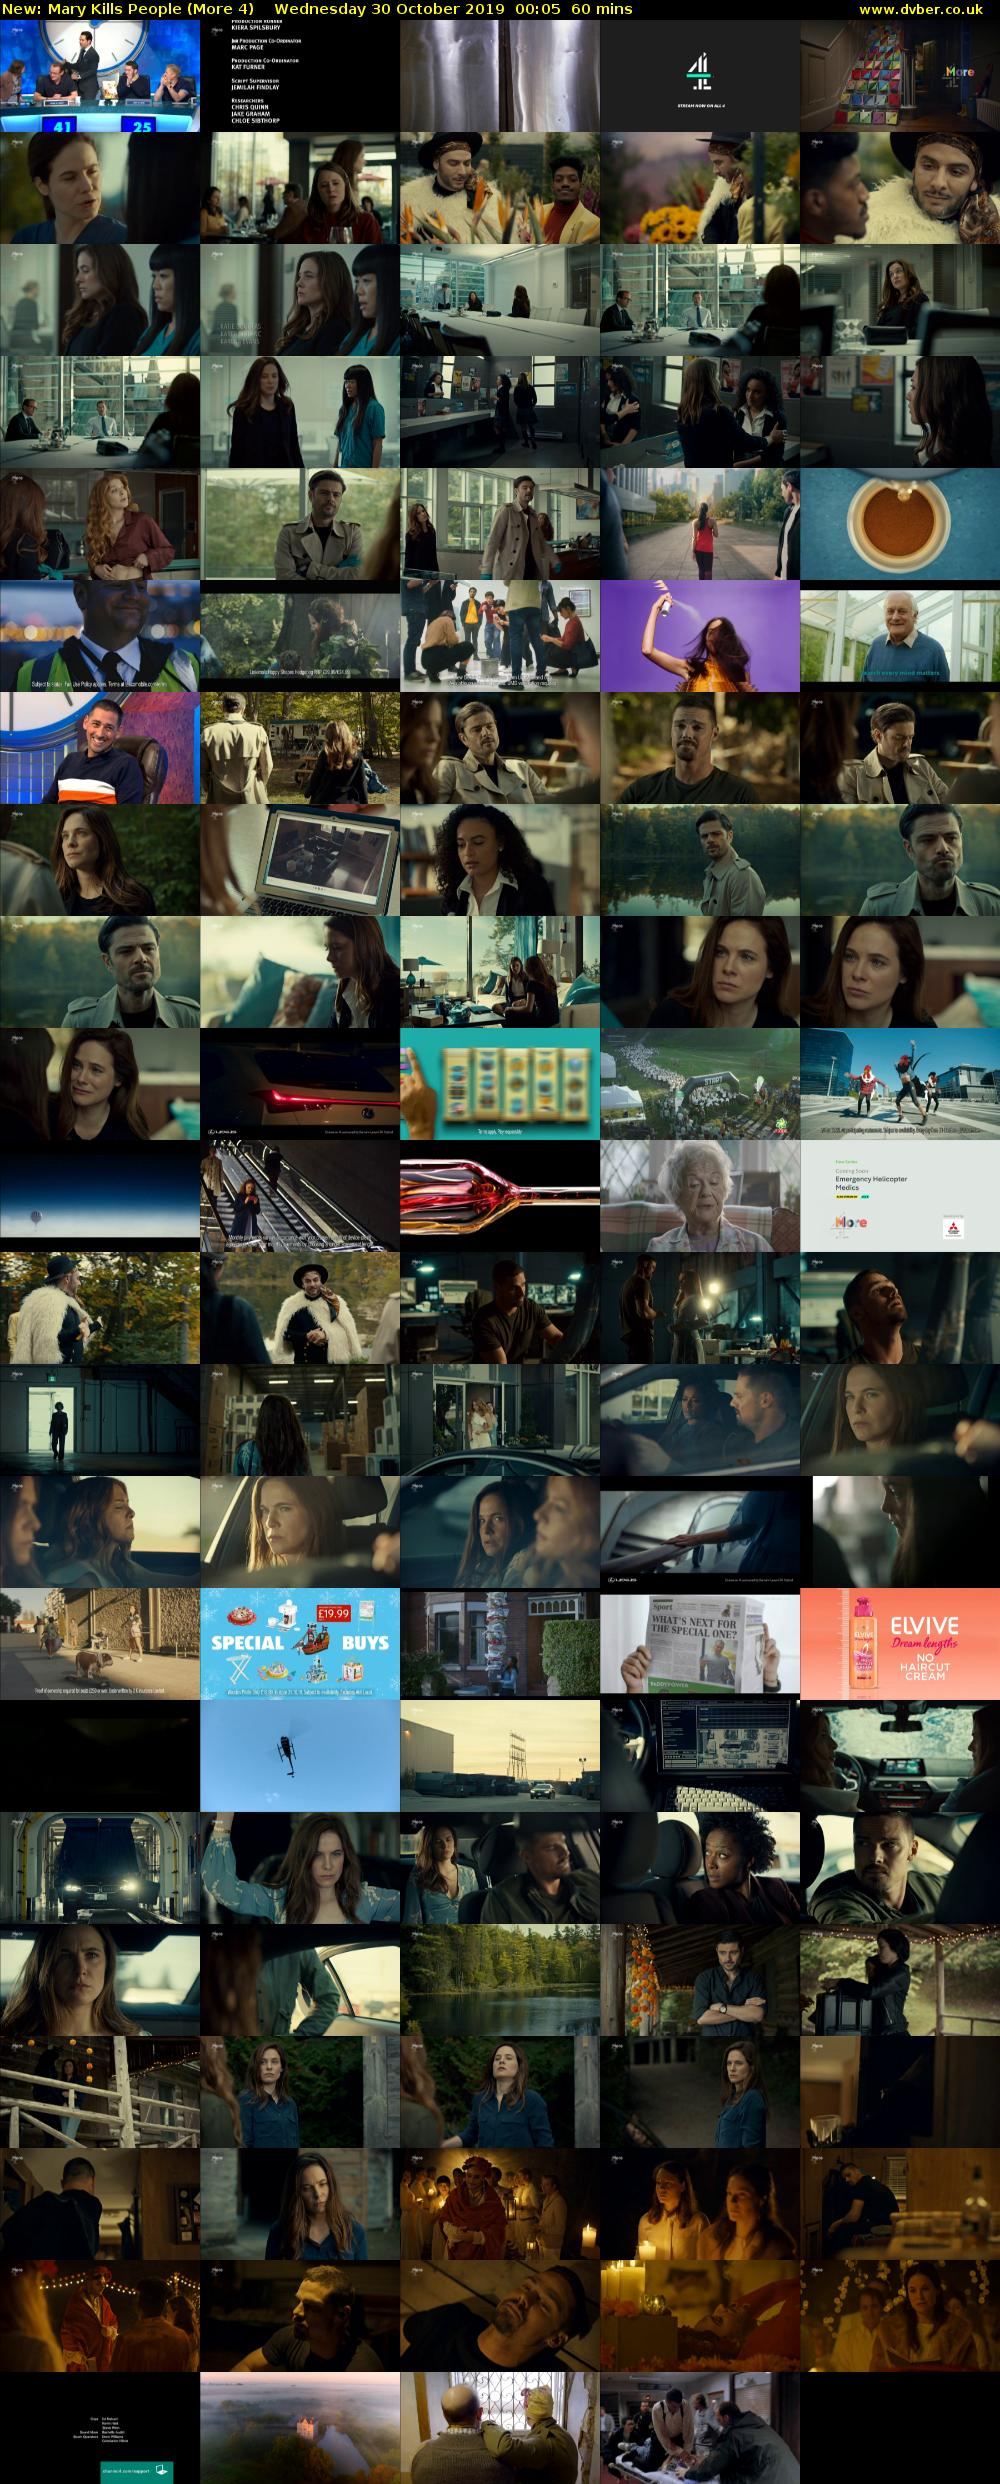 Mary Kills People (More 4) Wednesday 30 October 2019 00:05 - 01:05